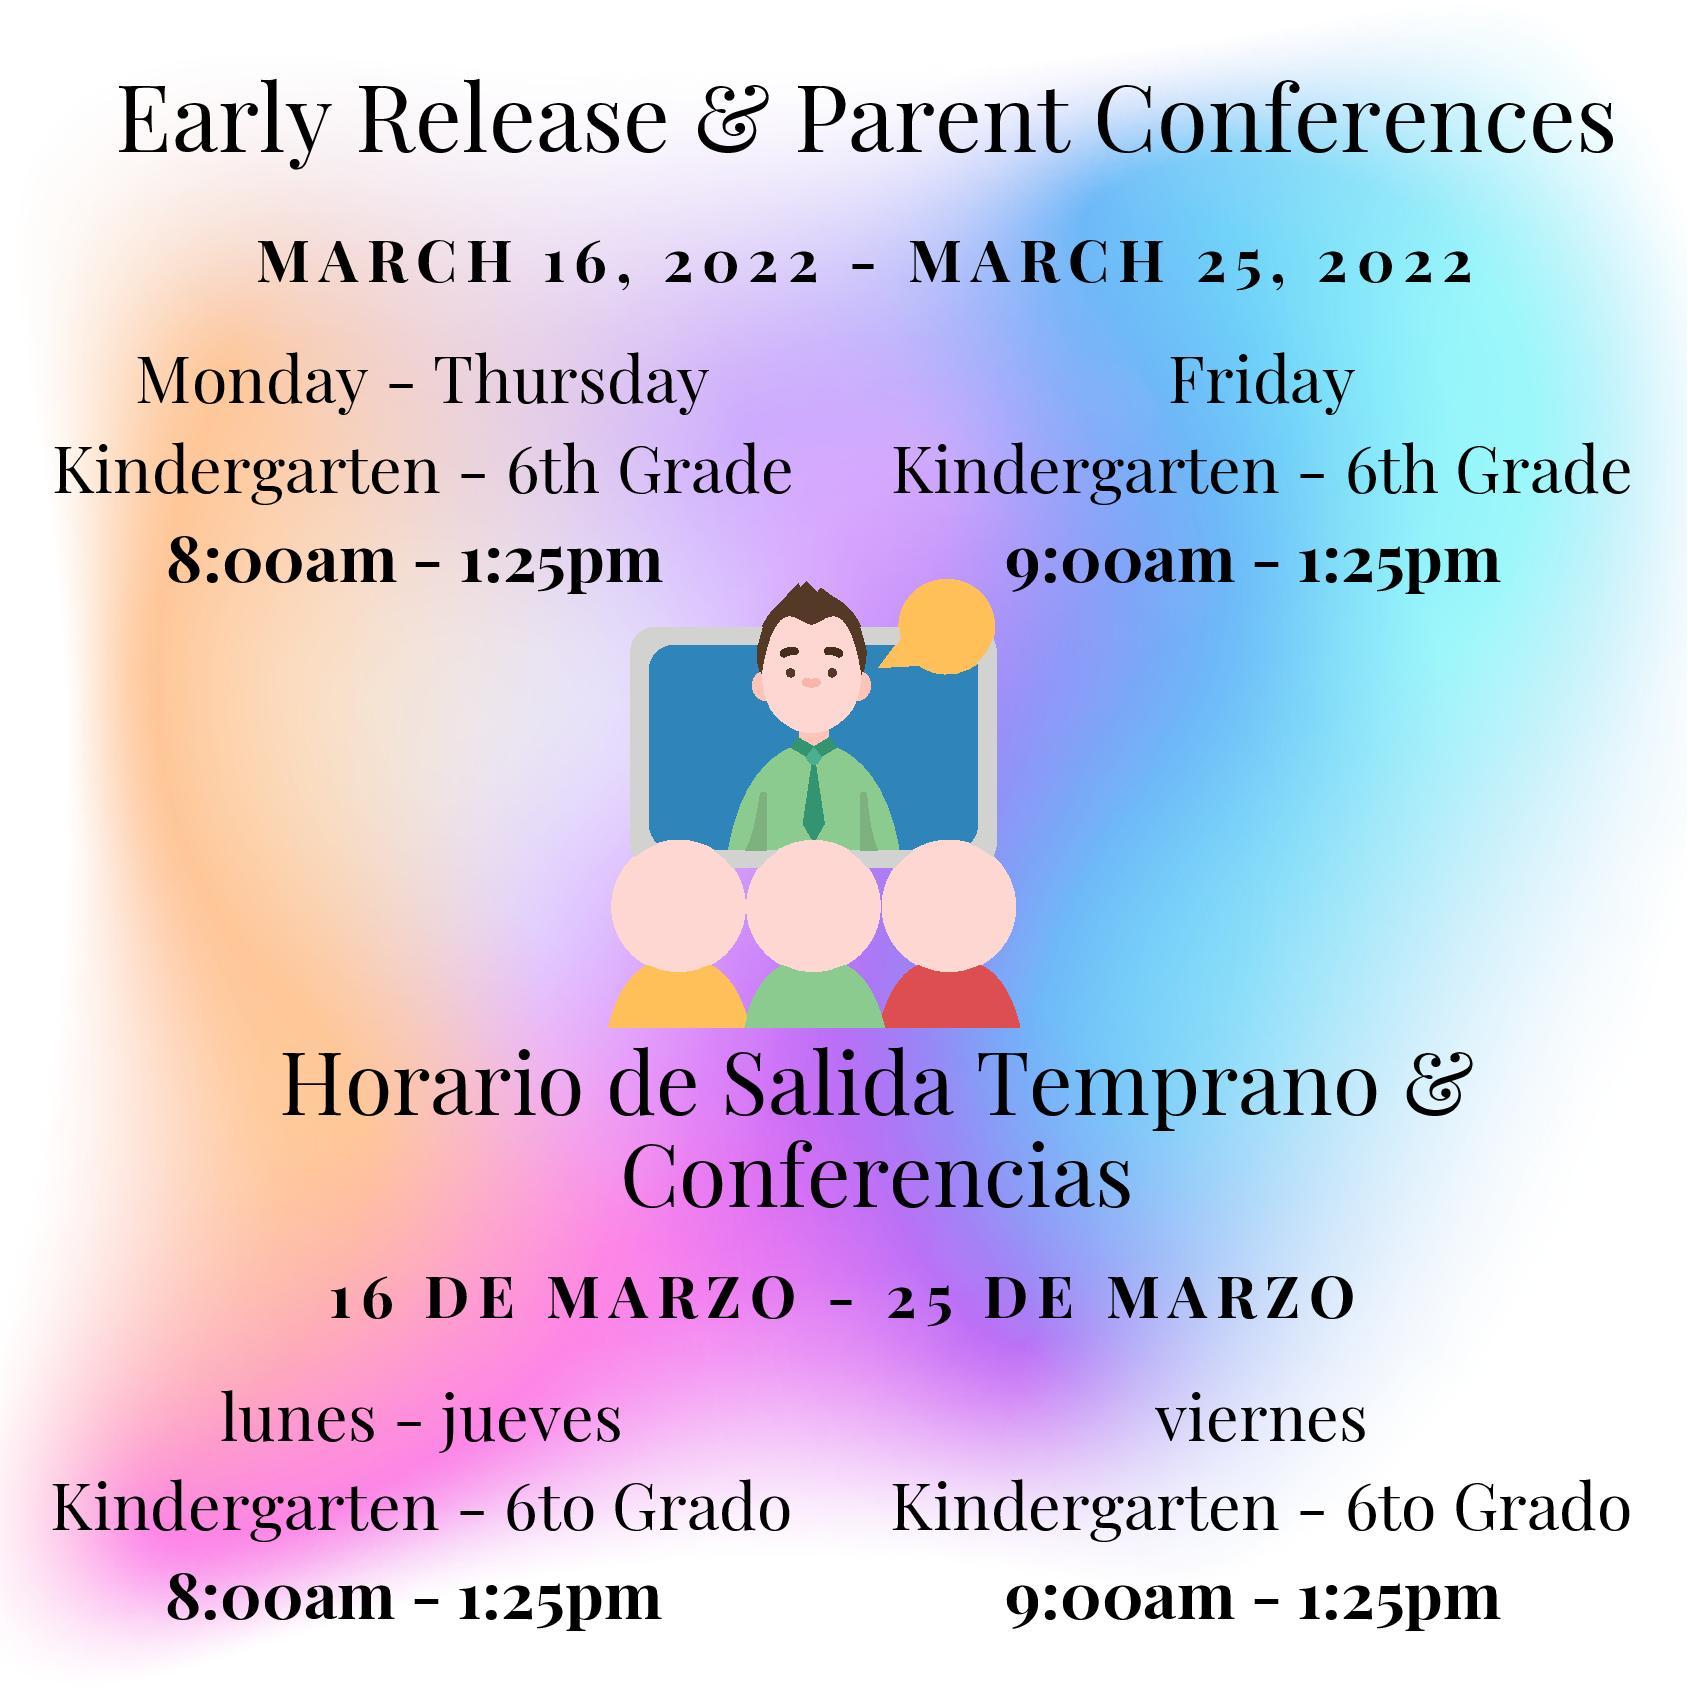 Early Release & Parent Conferences 